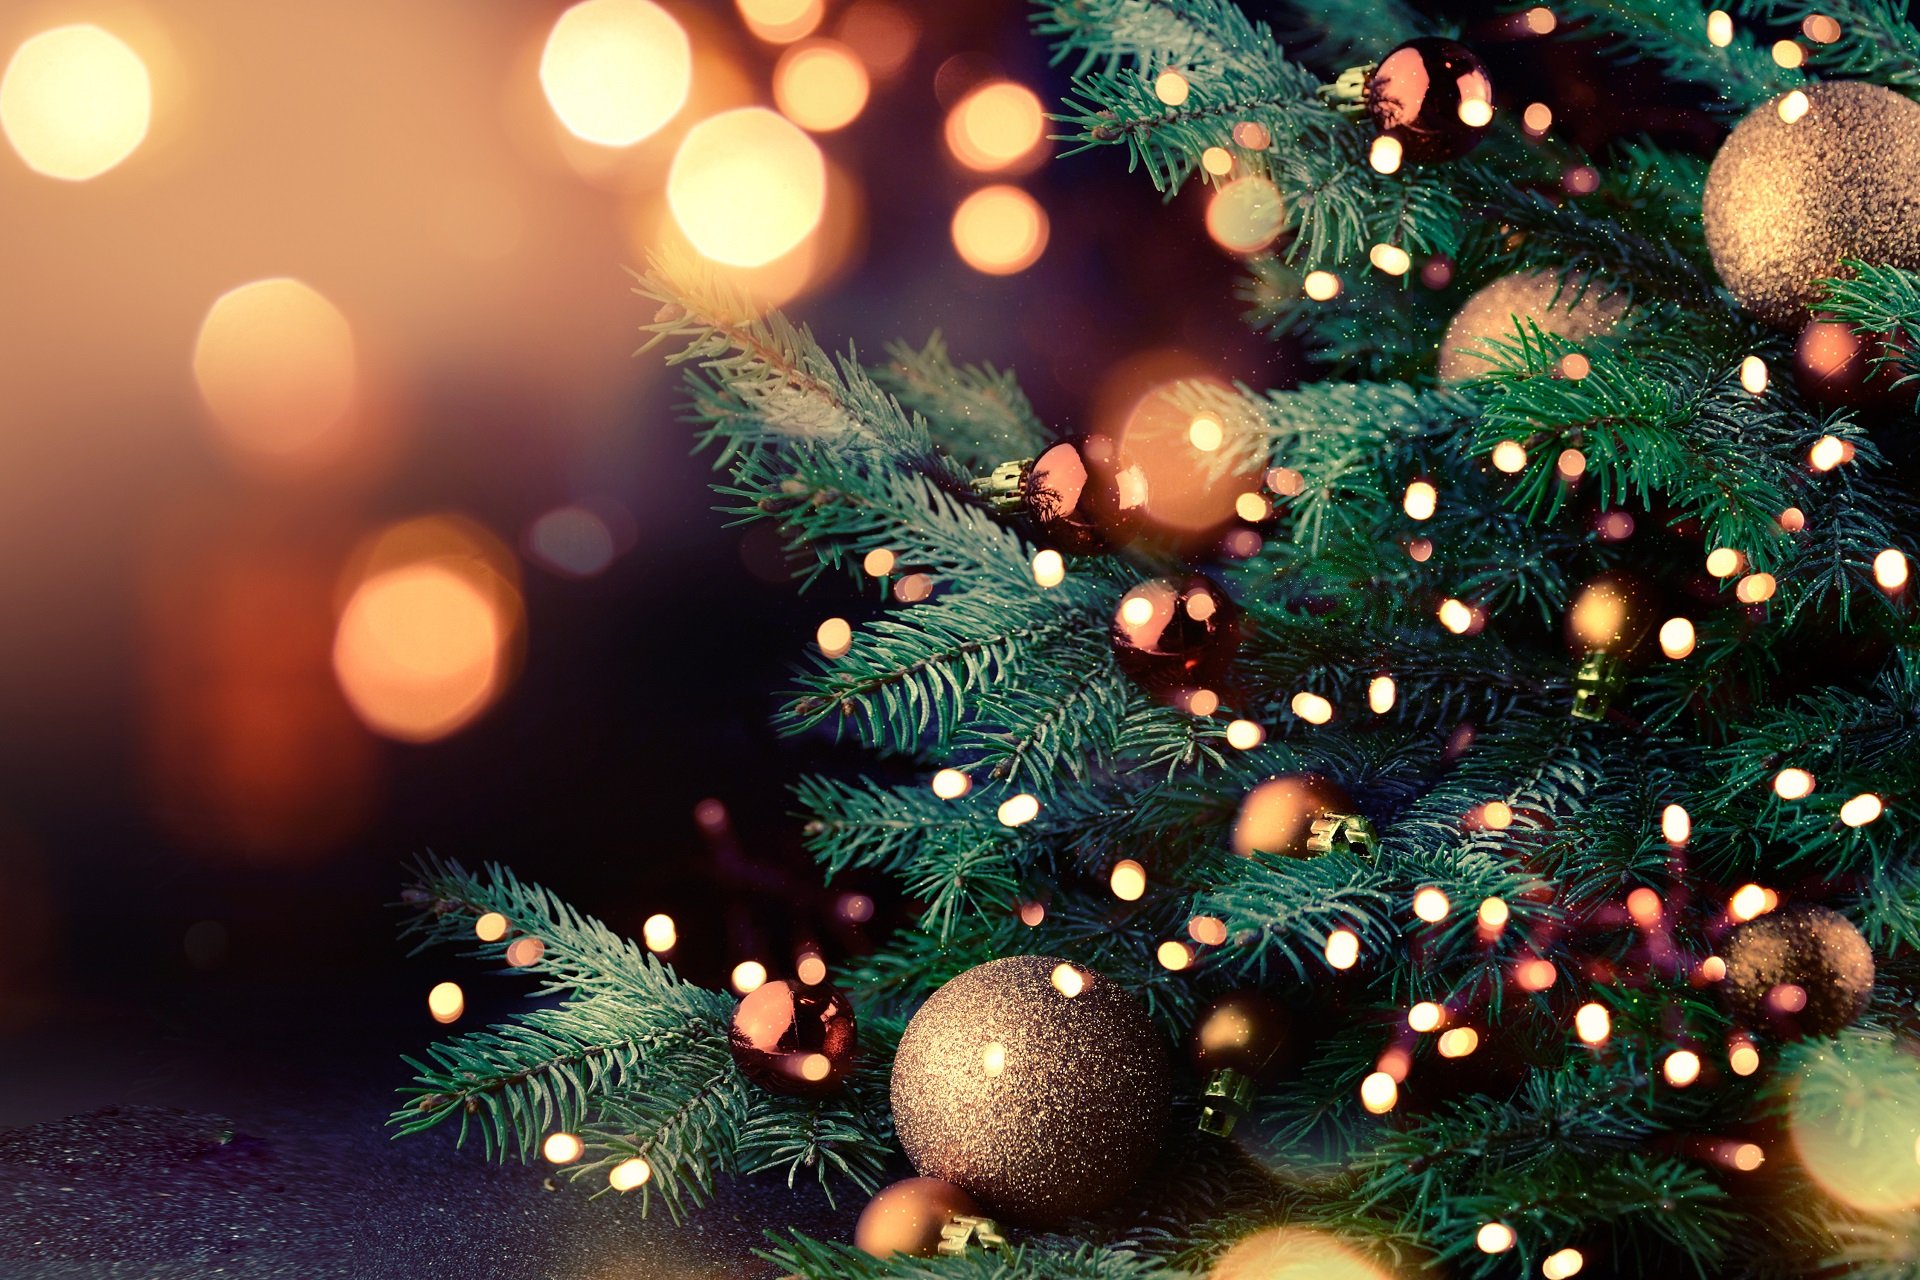 9 best Christmas live wallpapers & screensavers for Windows 10